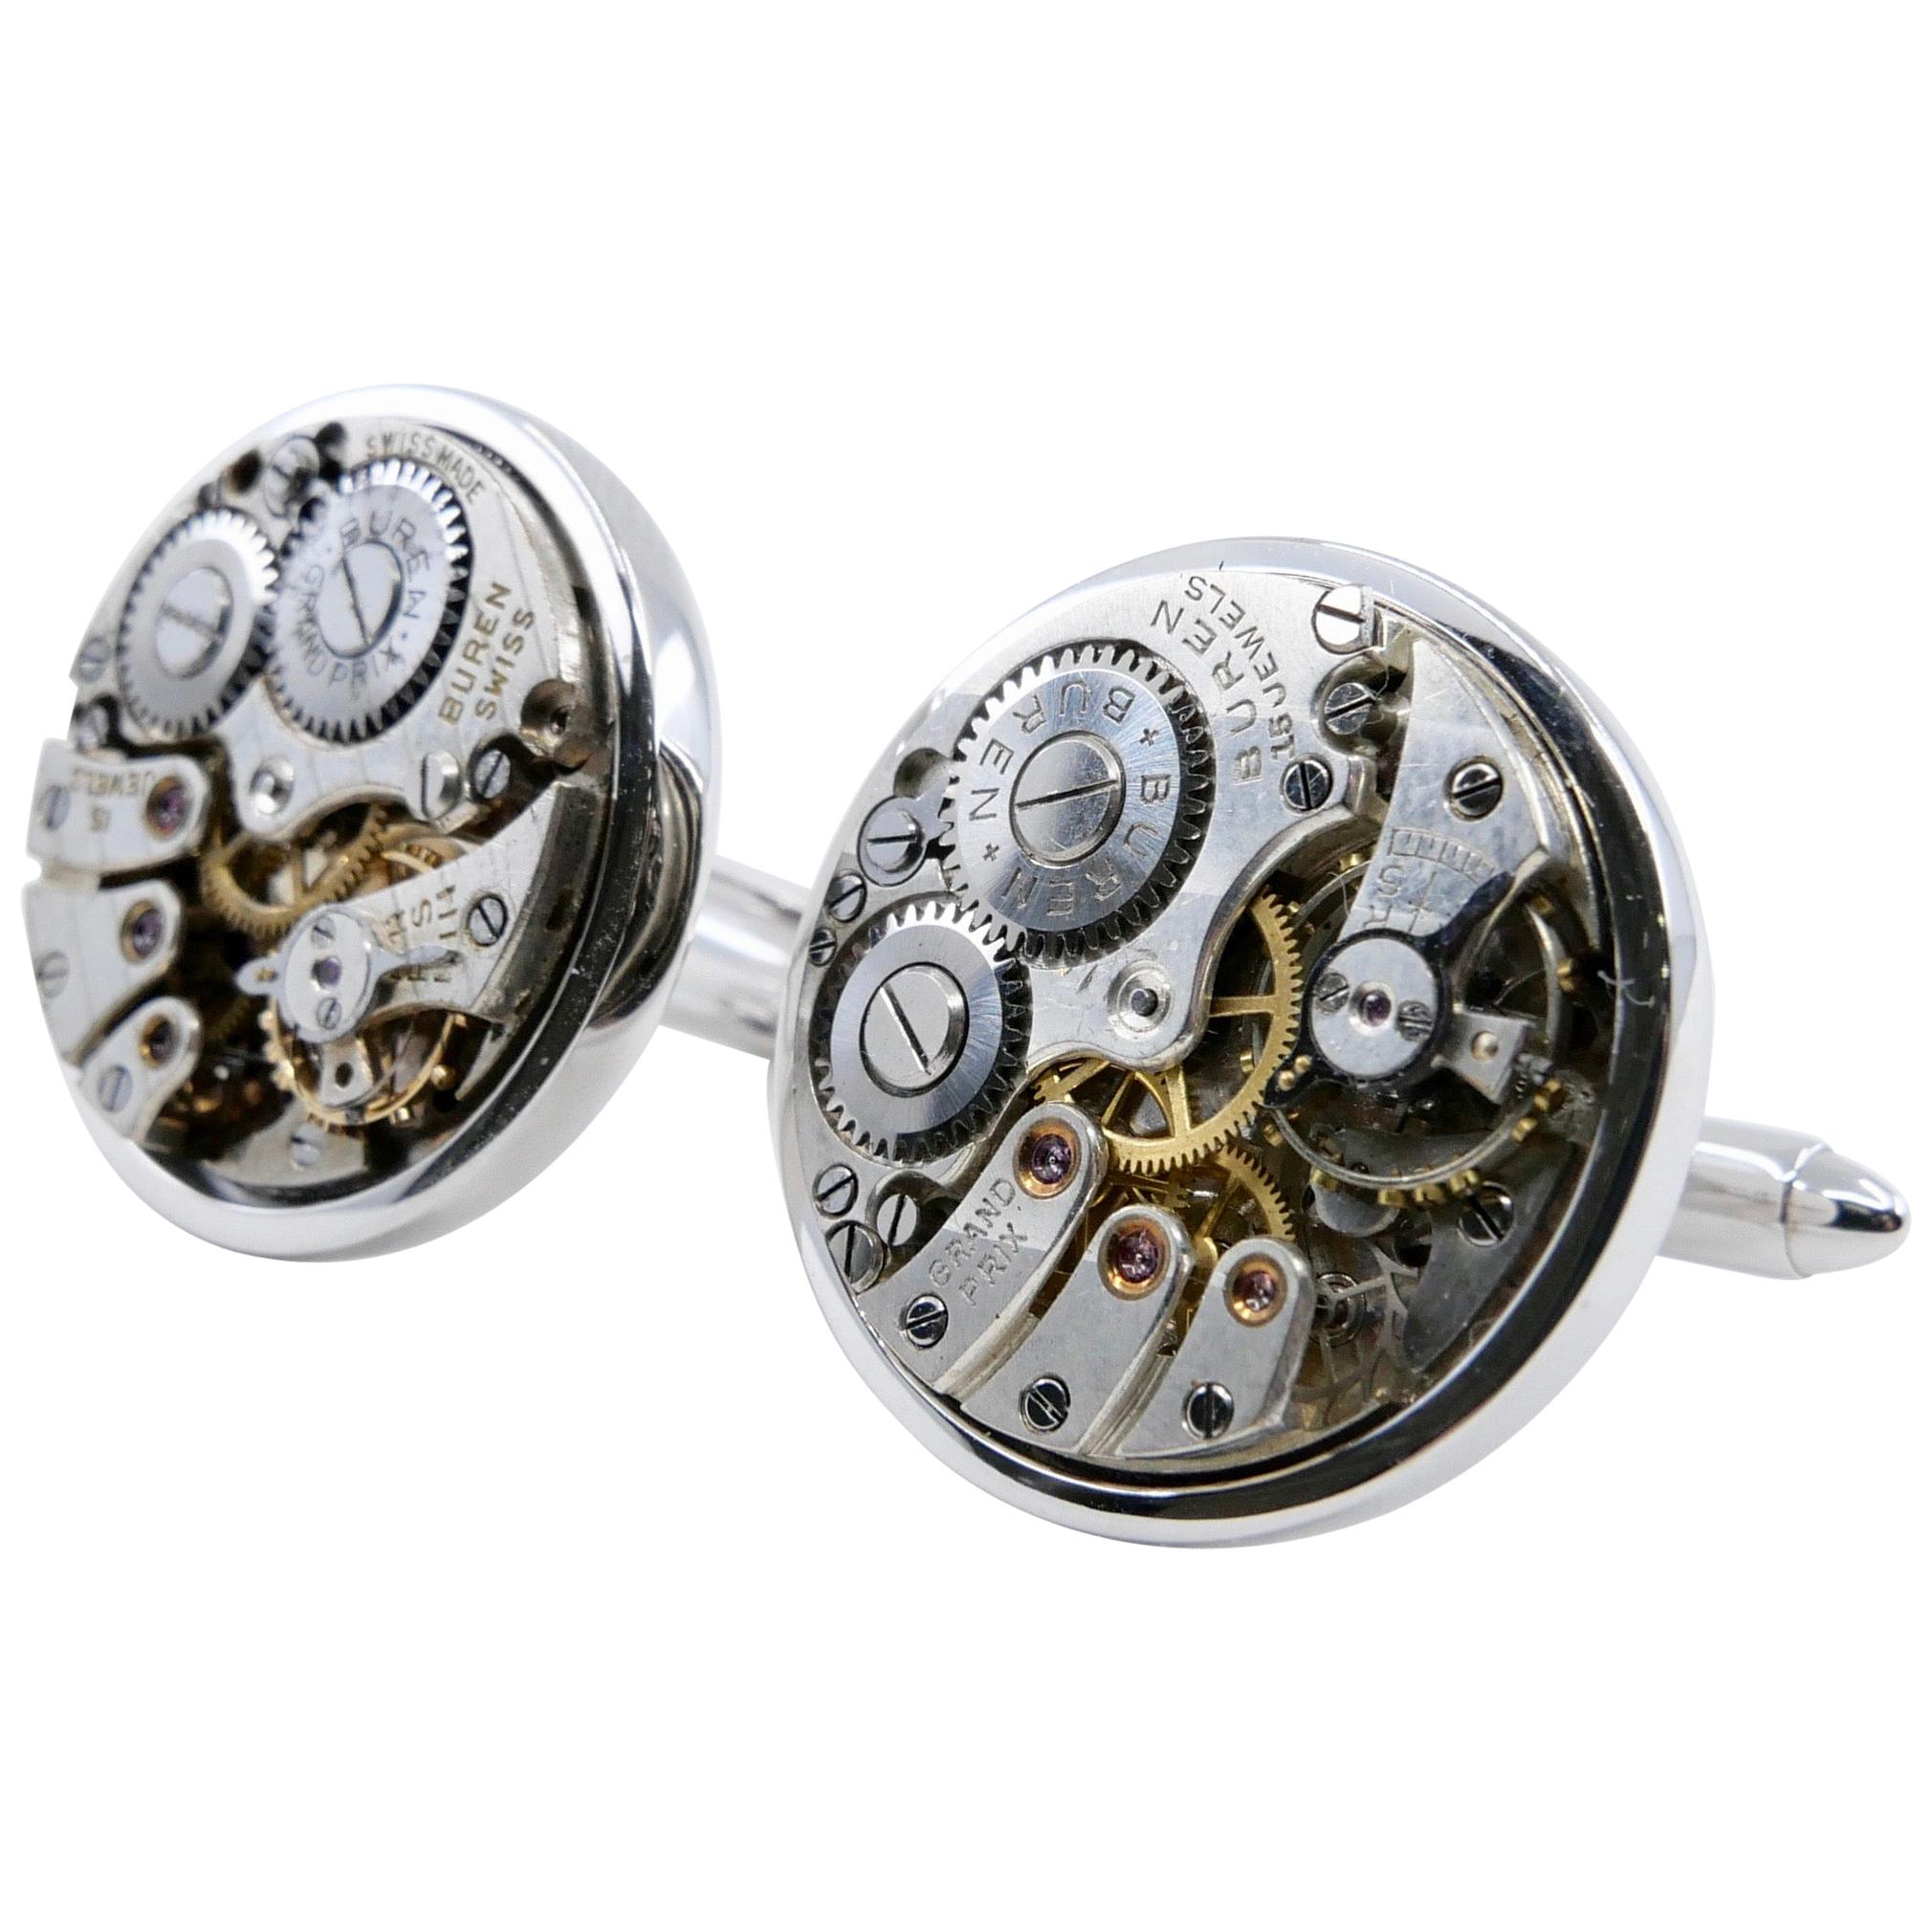 Here is something for the men. These 18k solid white gold cufflinks are awesome! A perfect gift for the watch connoisseur or someone building their cufflink collection. These are made of solid 18k gold. The total weight is almost 22 grams including